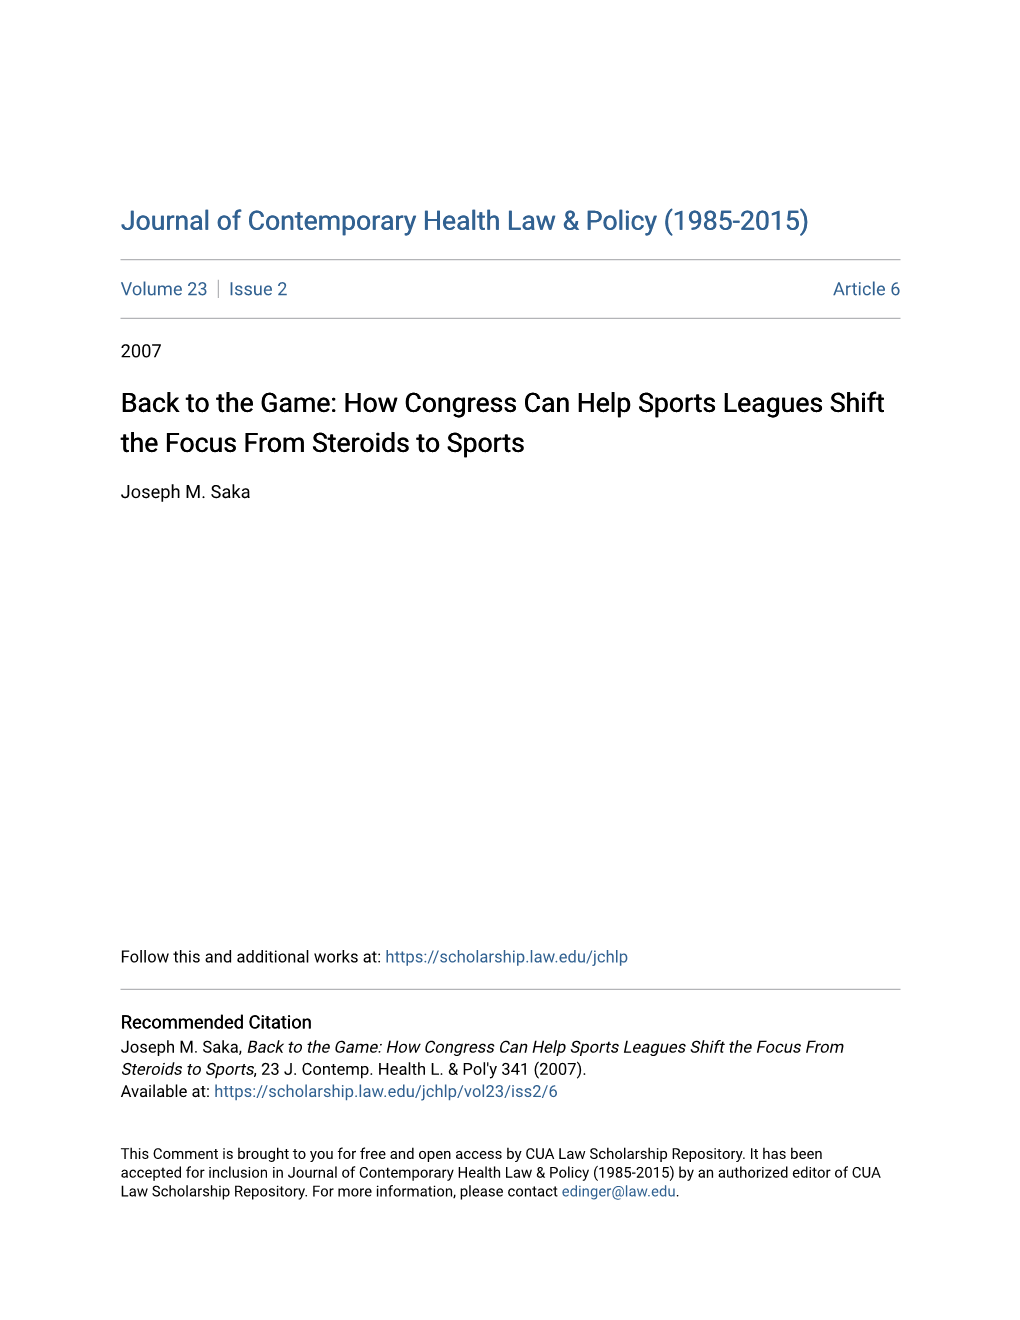 Back to the Game: How Congress Can Help Sports Leagues Shift the Focus from Steroids to Sports